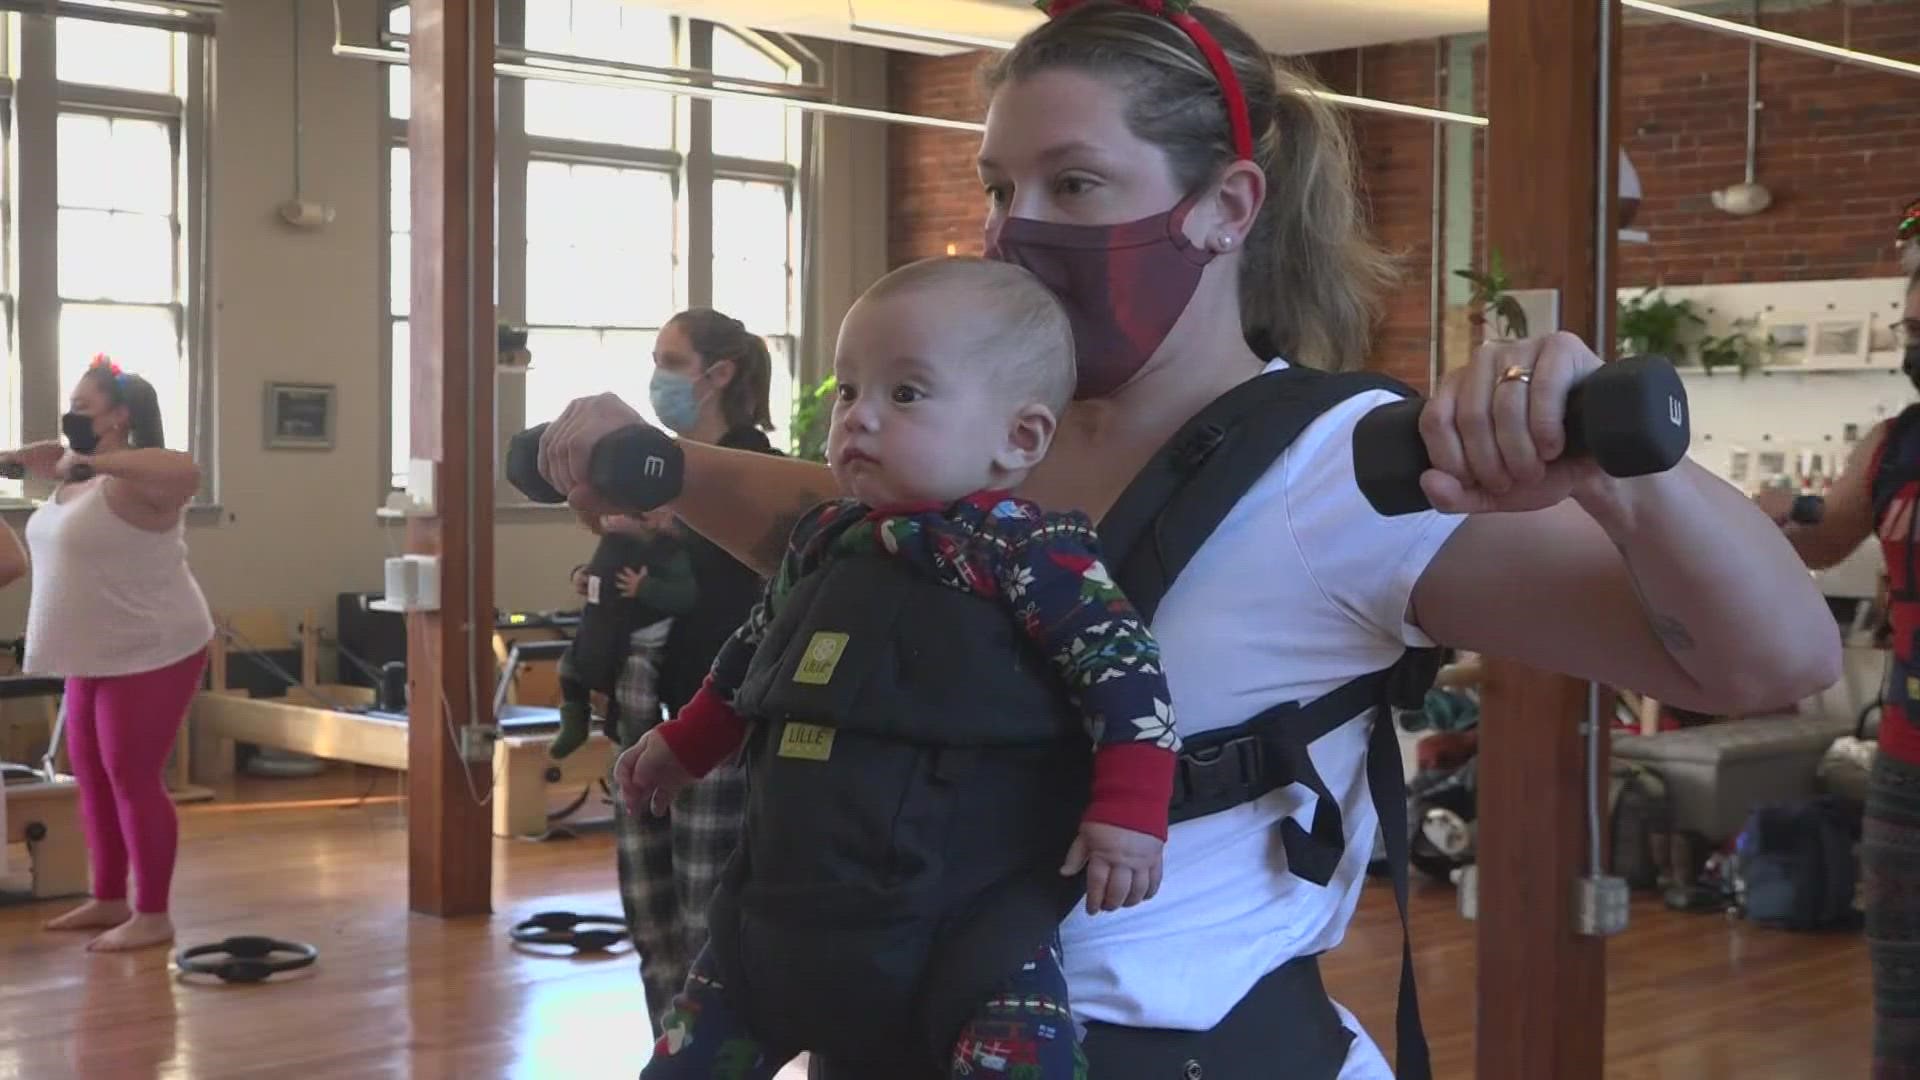 The class allows new moms to work out together with their little ones strapped right in front of them.